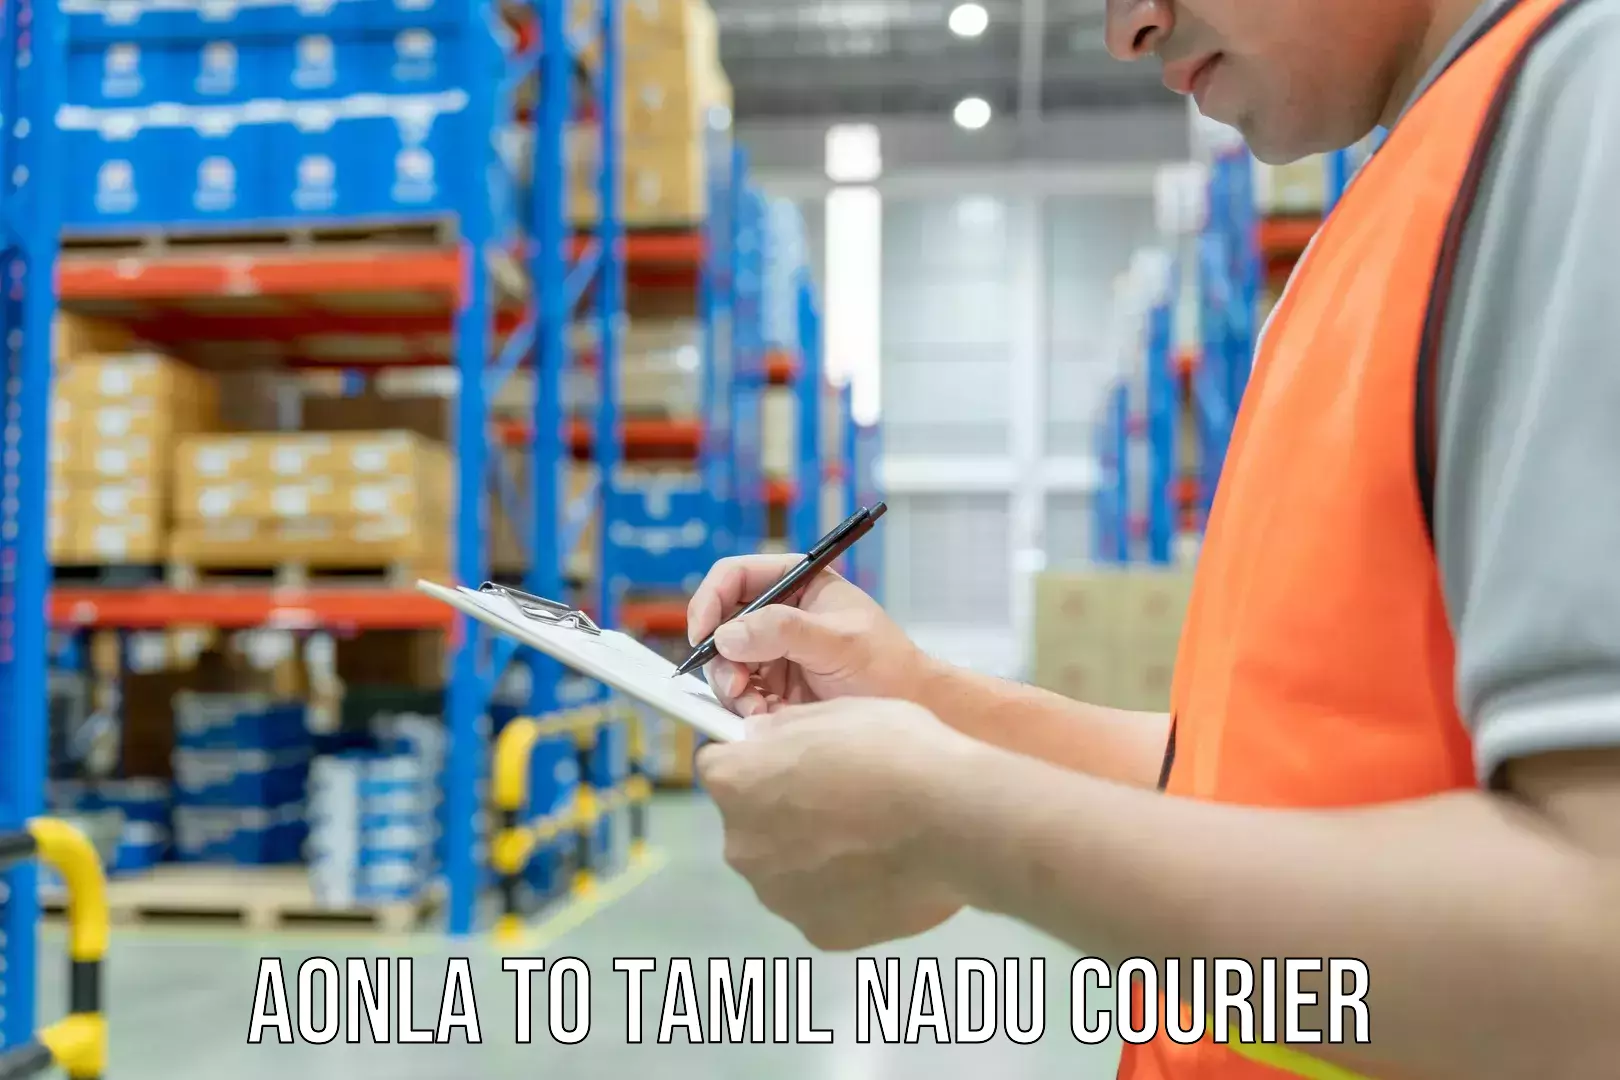 Customizable delivery plans Aonla to Tamil Nadu